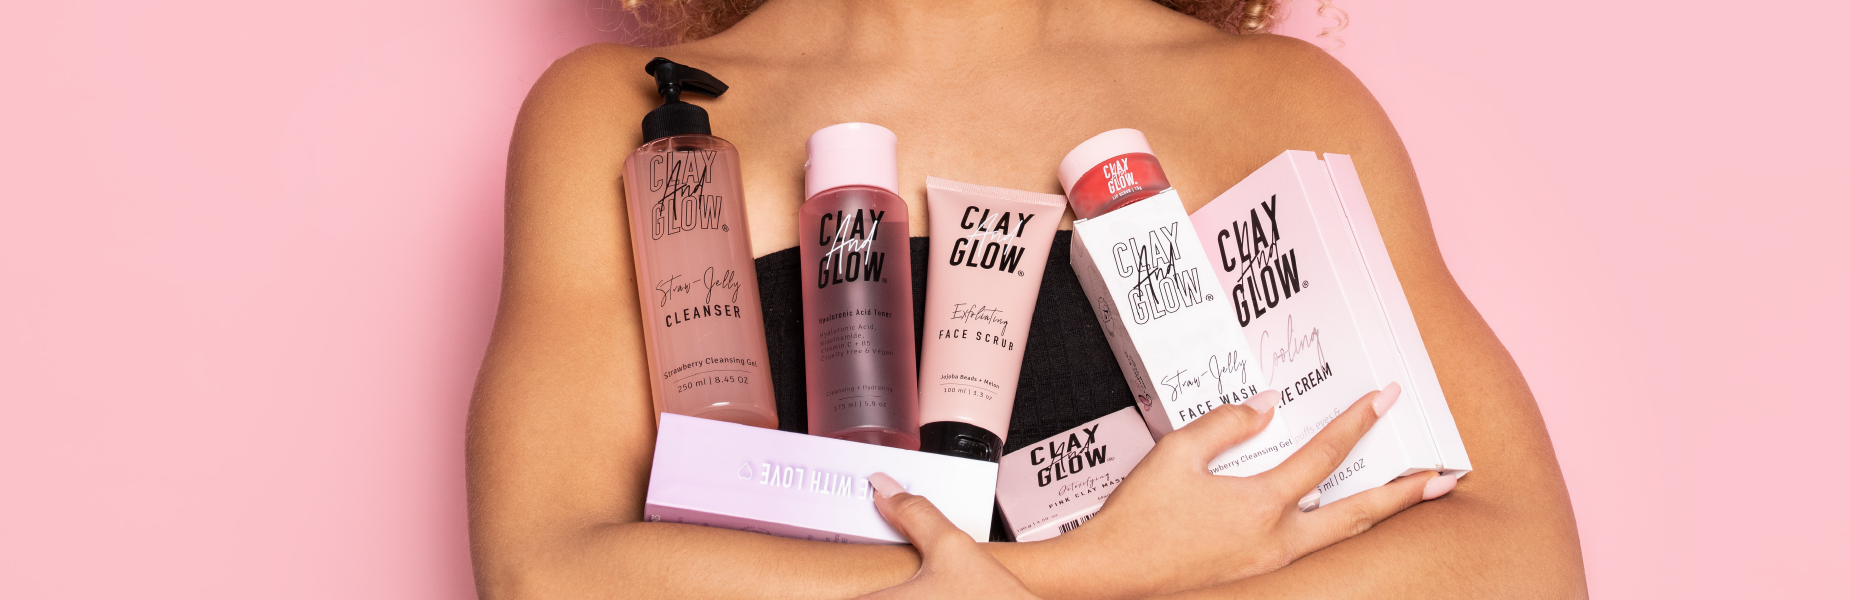 clay-and-glow-products-in-model-hands